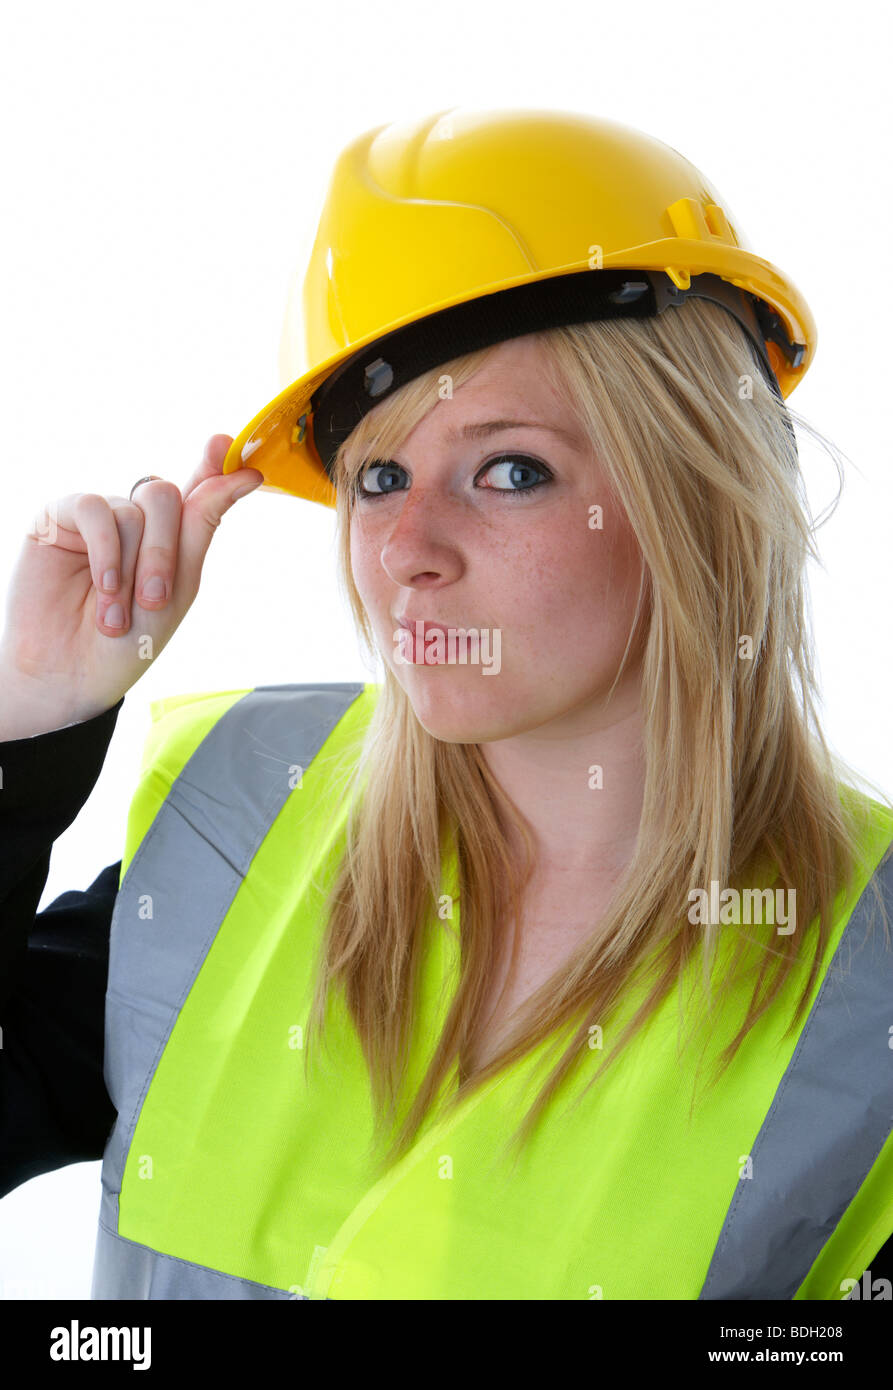 young 20 year old blonde woman wearing yellow hard hat and high vis vest tipping her hat with wry smile and with eye contact Stock Photo